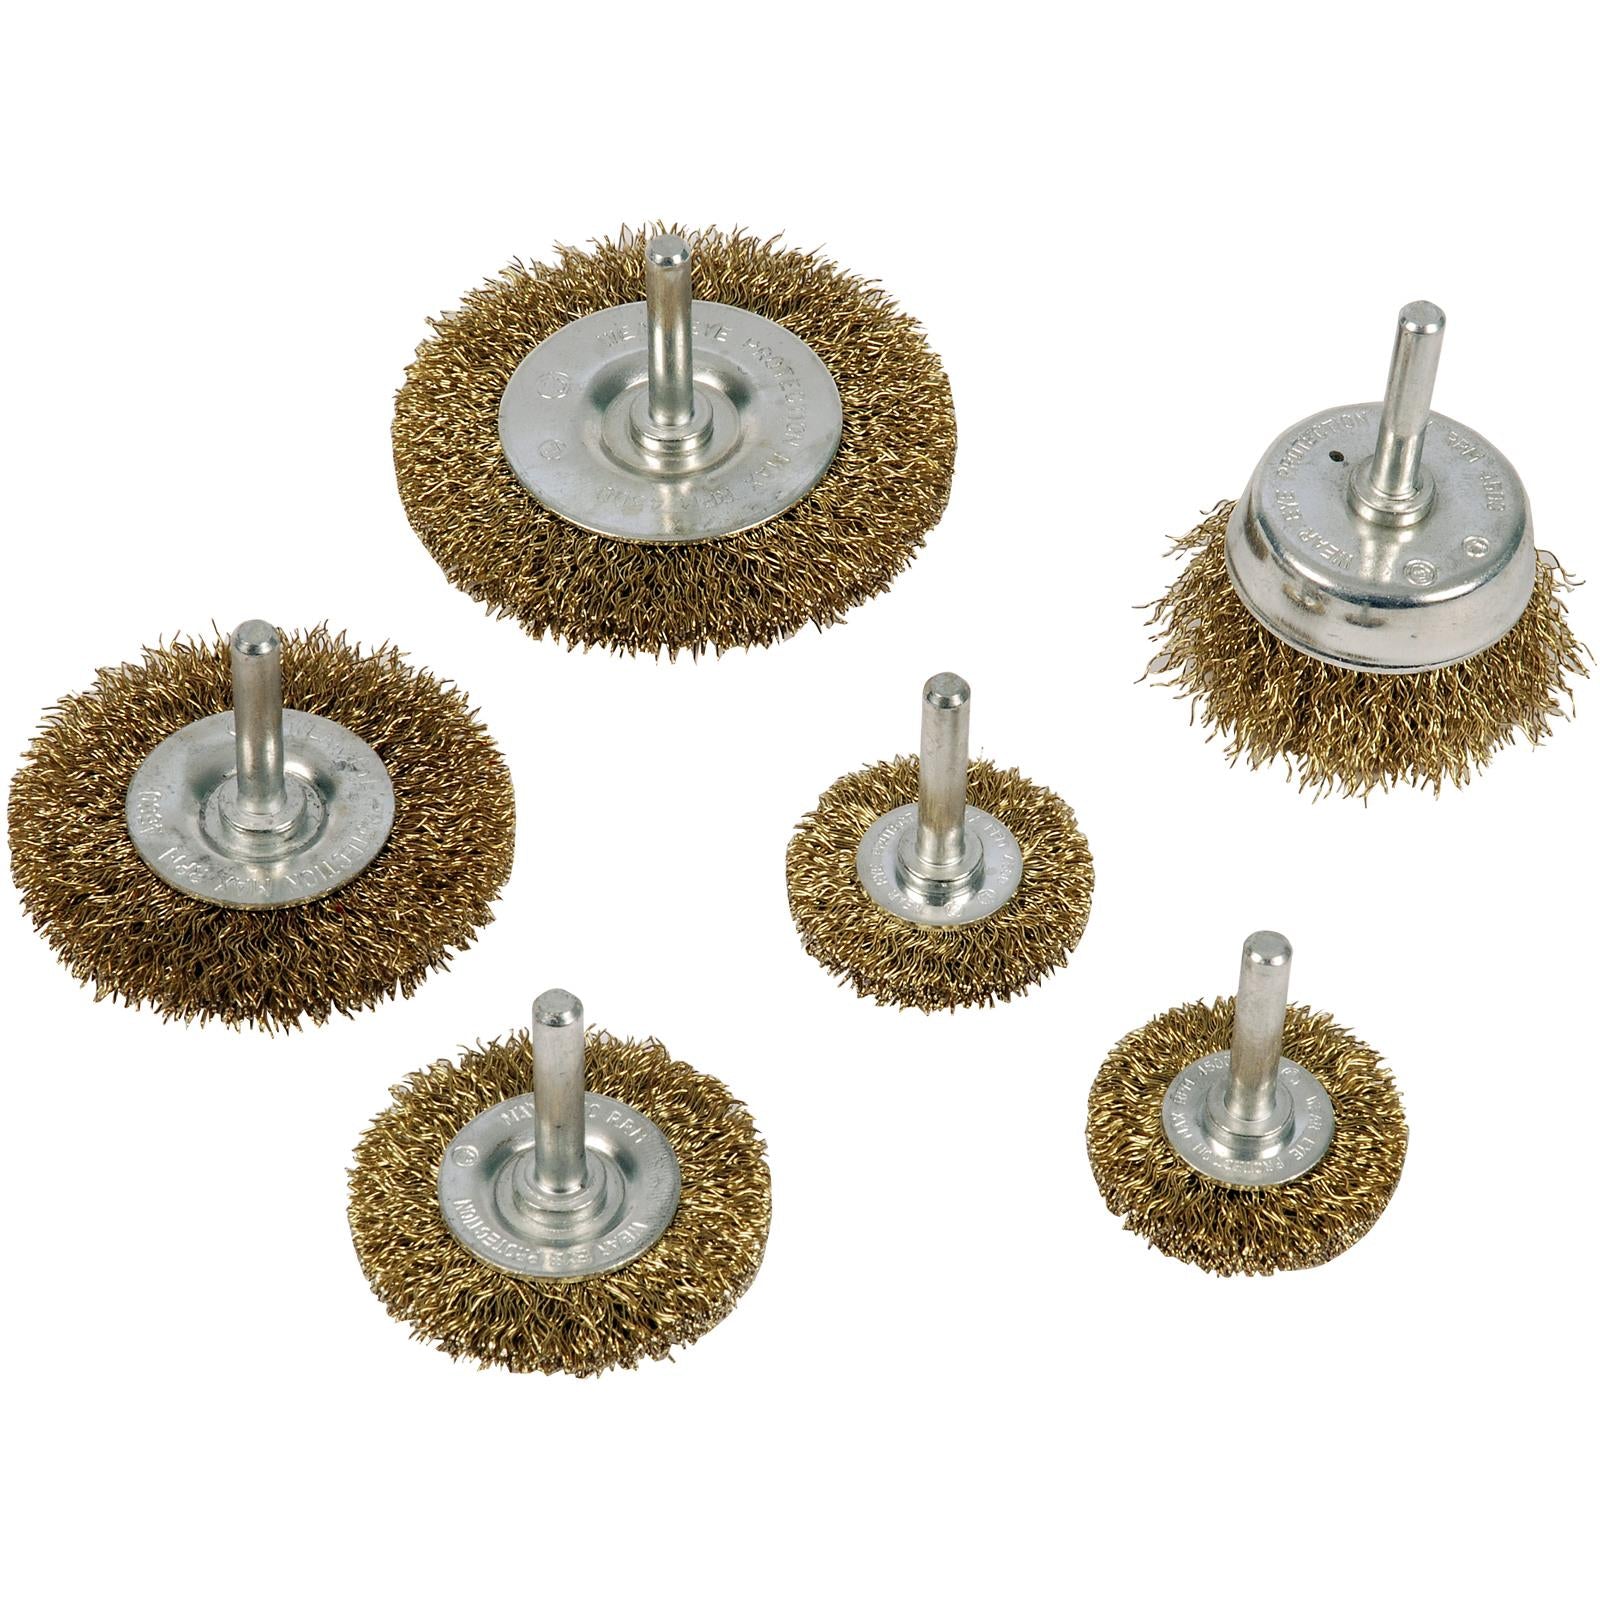 Silverline 6 Piece Wire Wheel & Cup Brush Set 6mm Shank Paint Rust Removal